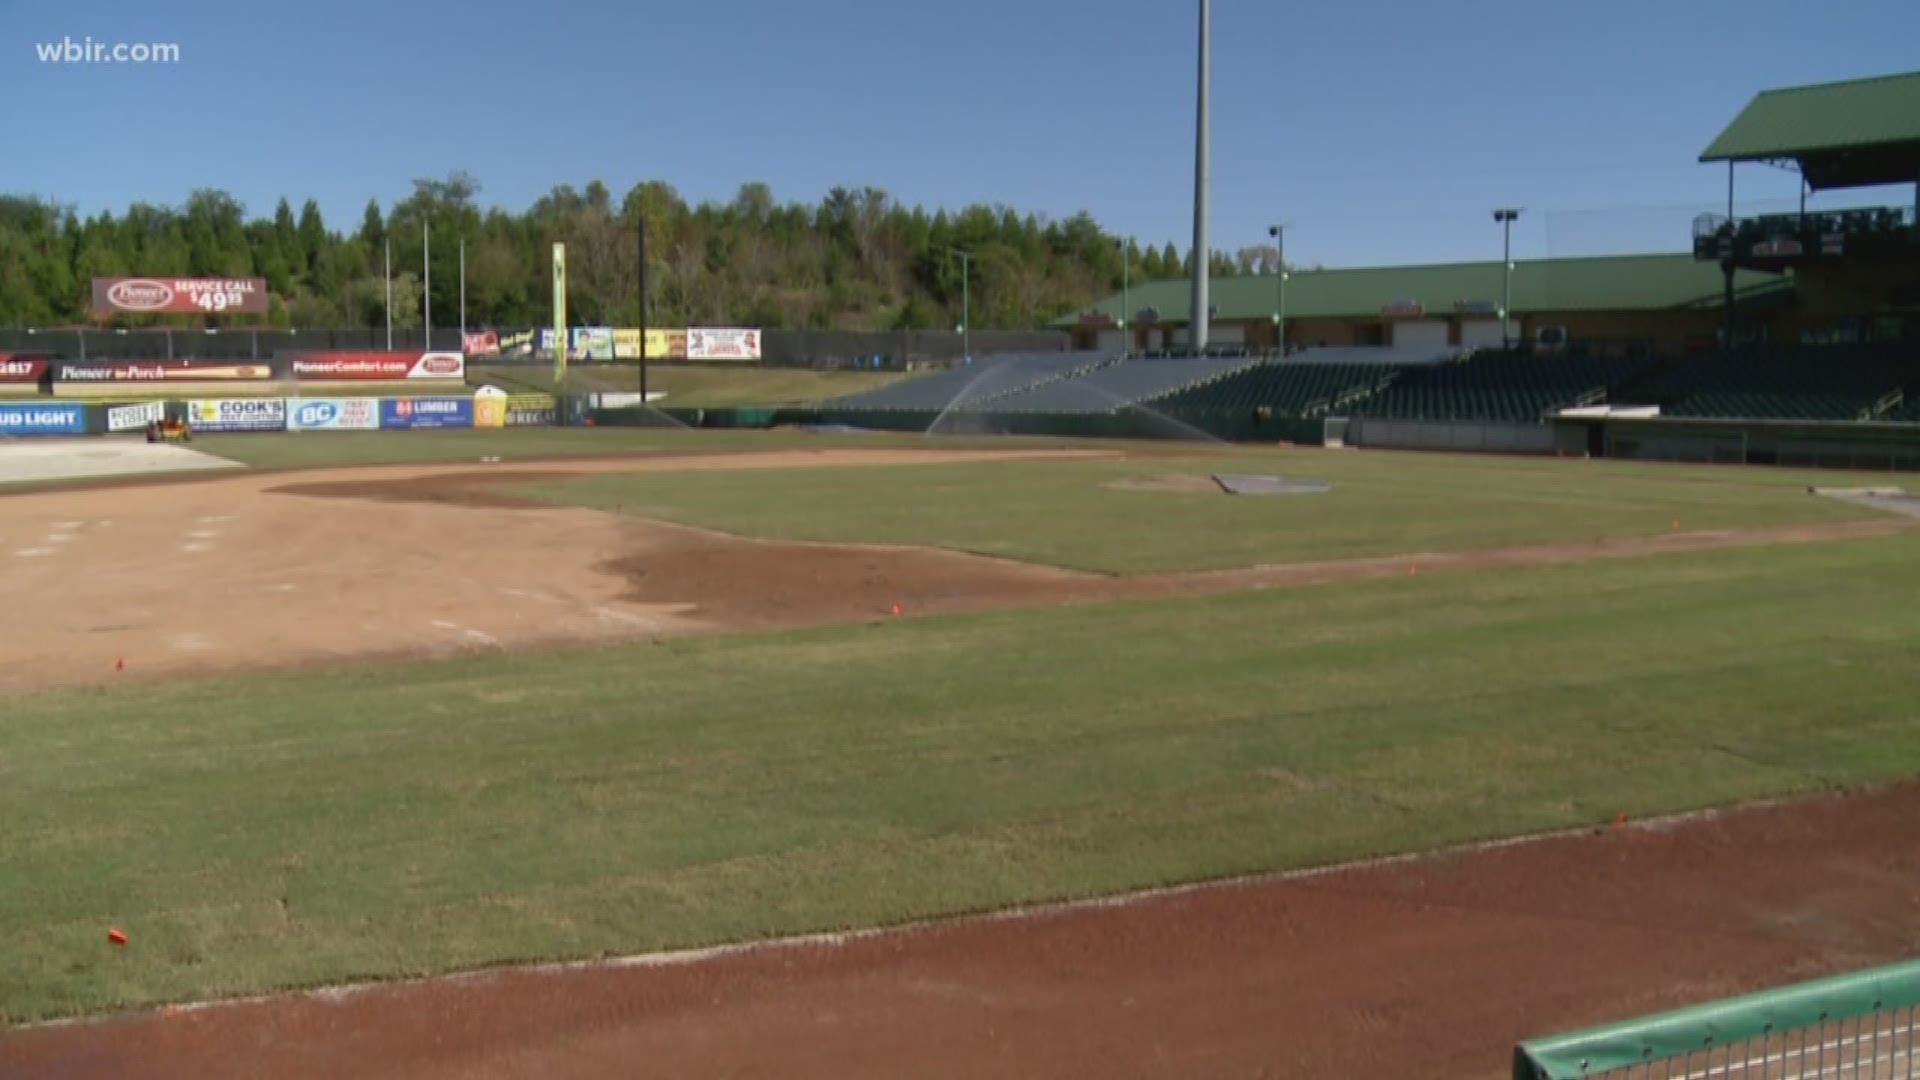 The field is getting an upgrade for the Smokies!